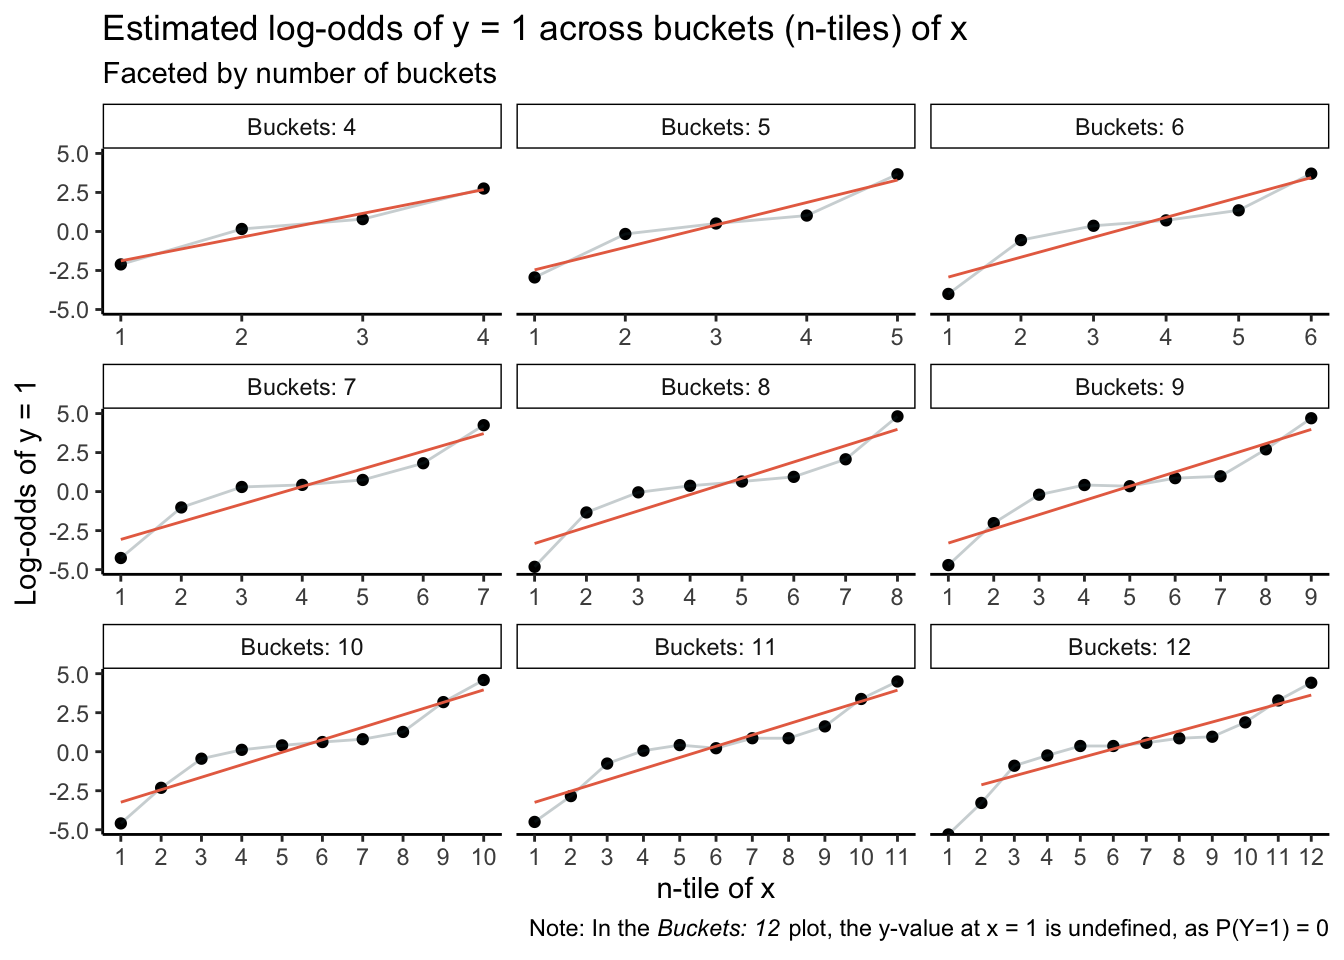 estimated log-odds of y=1 across n-tiles of x, stratified by z and faceted by number of buckets/n-tiles, revealing nonlinearity as the number of buckets increases